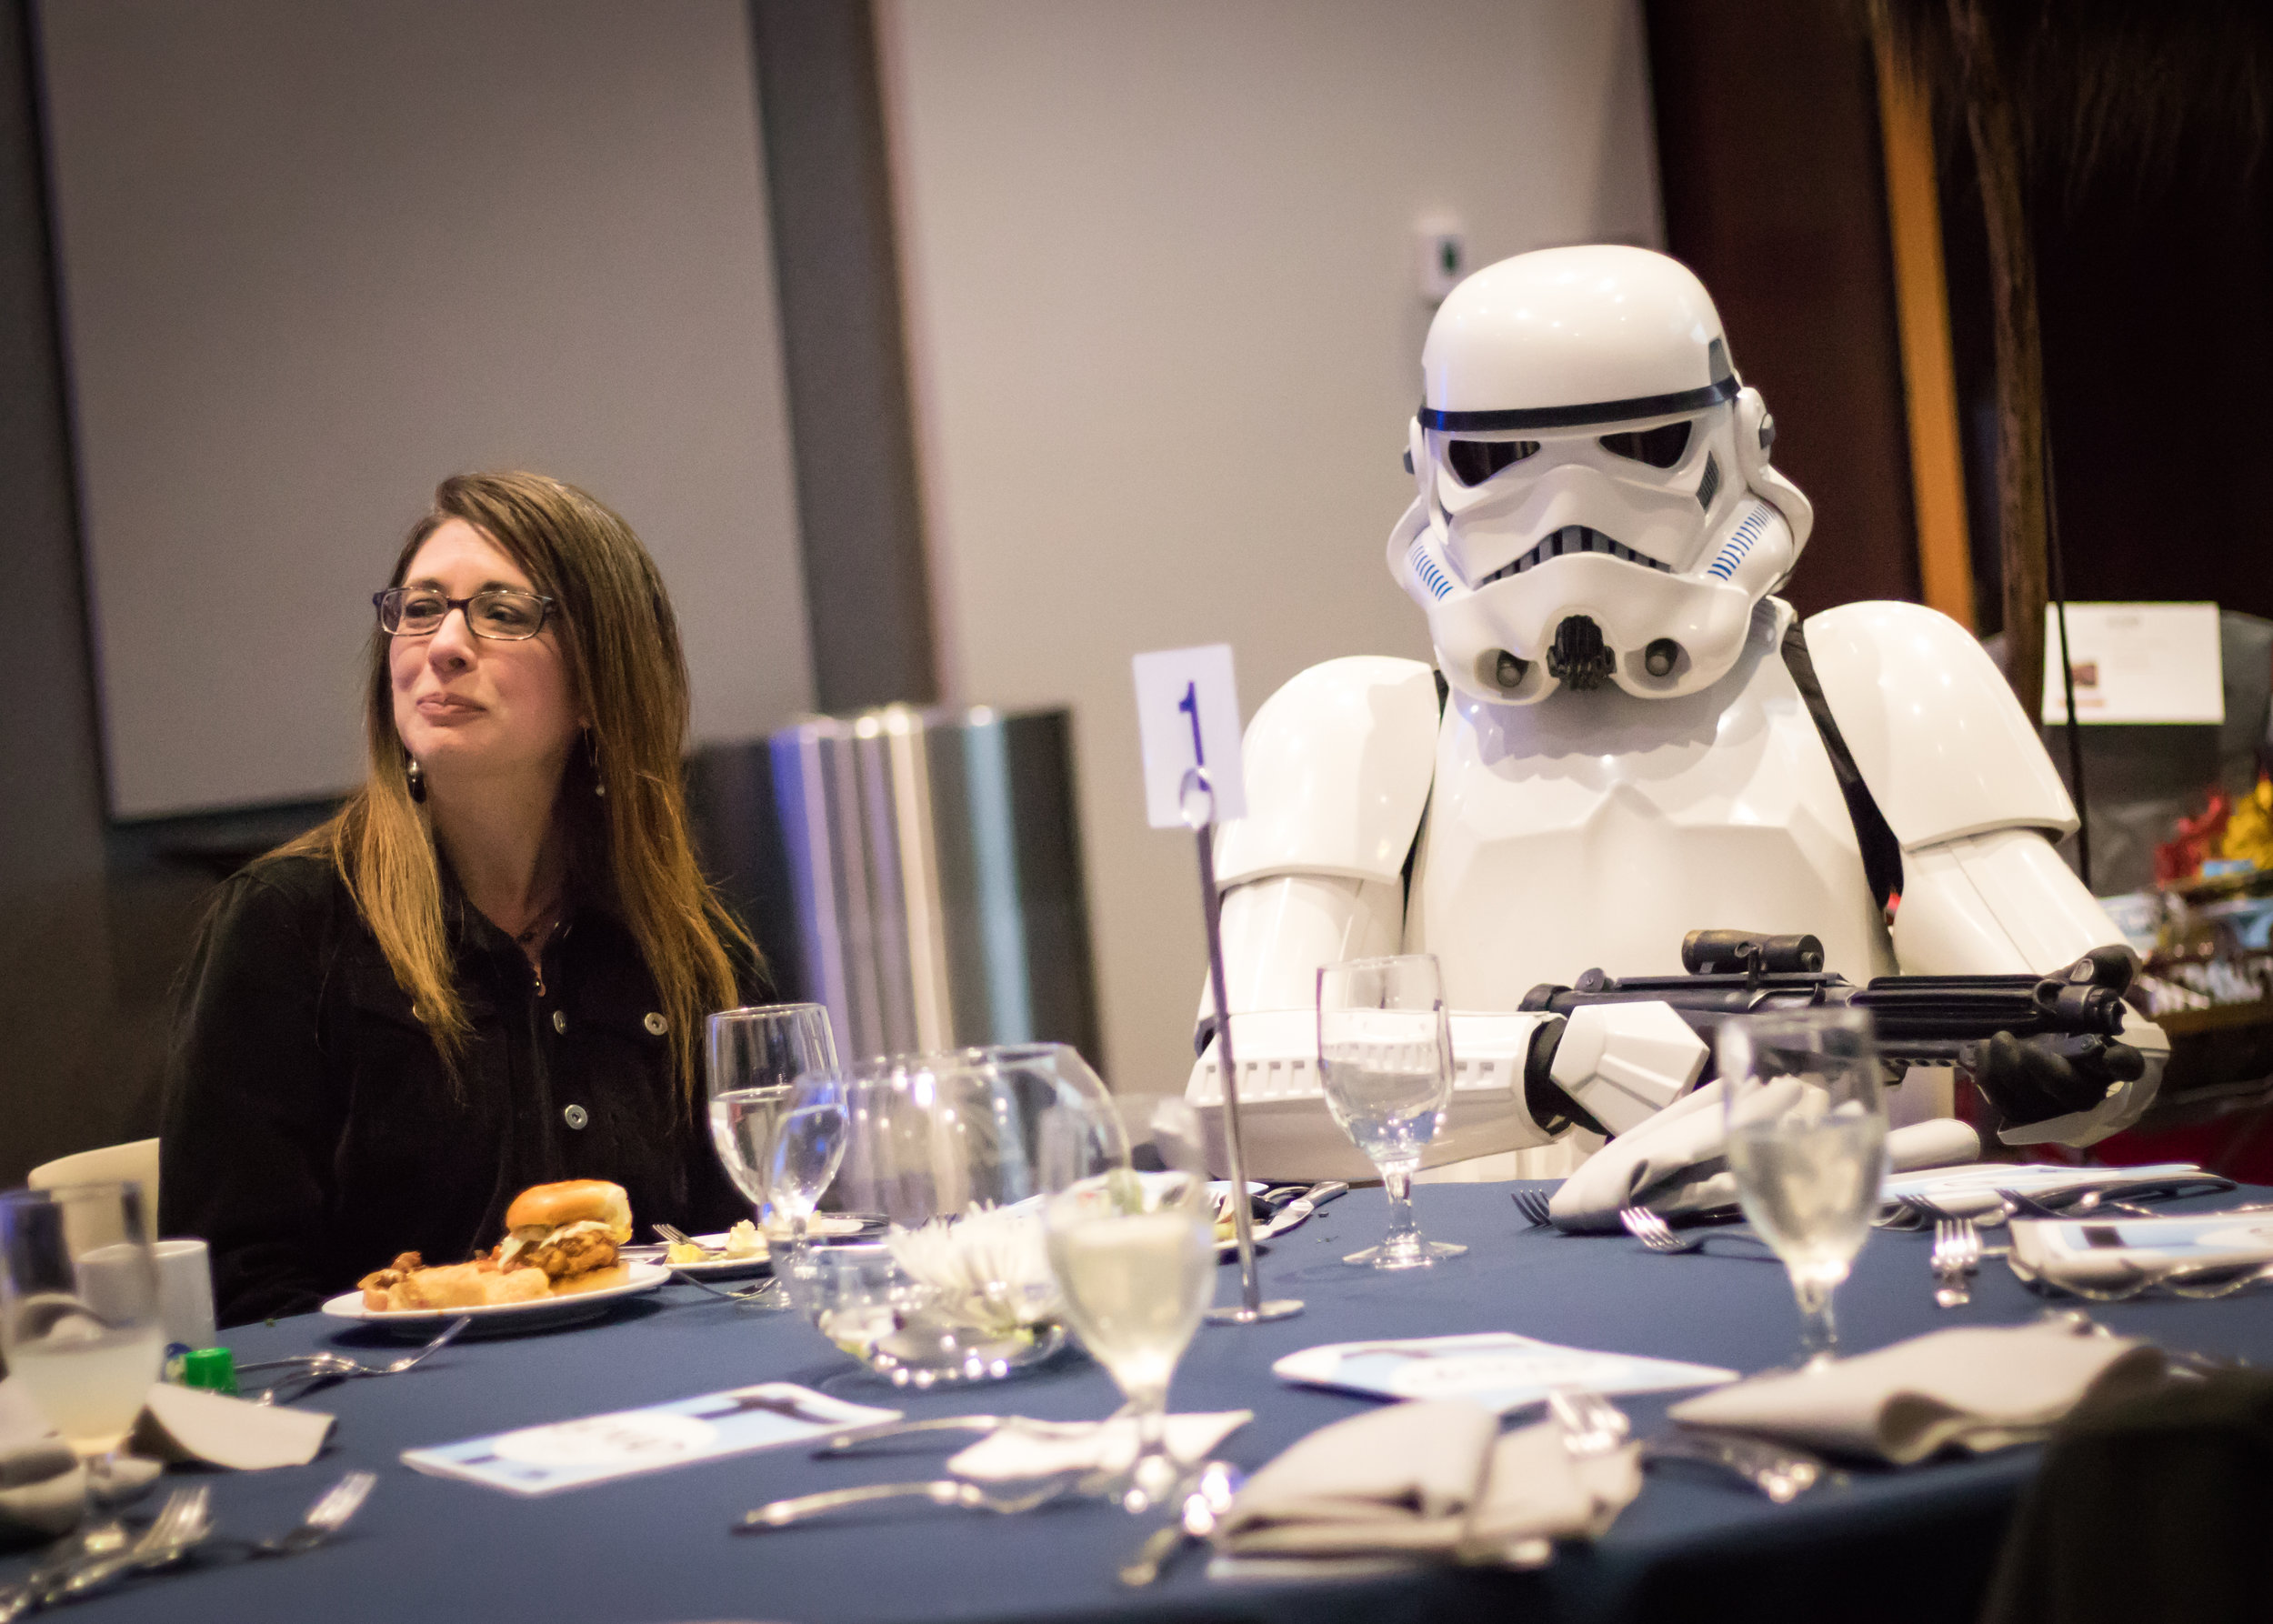  Go MAD Gala Fundraiser &amp; Auction (with 501st NDG), Parkview Mirro Center for Research and Innovation, 2017 